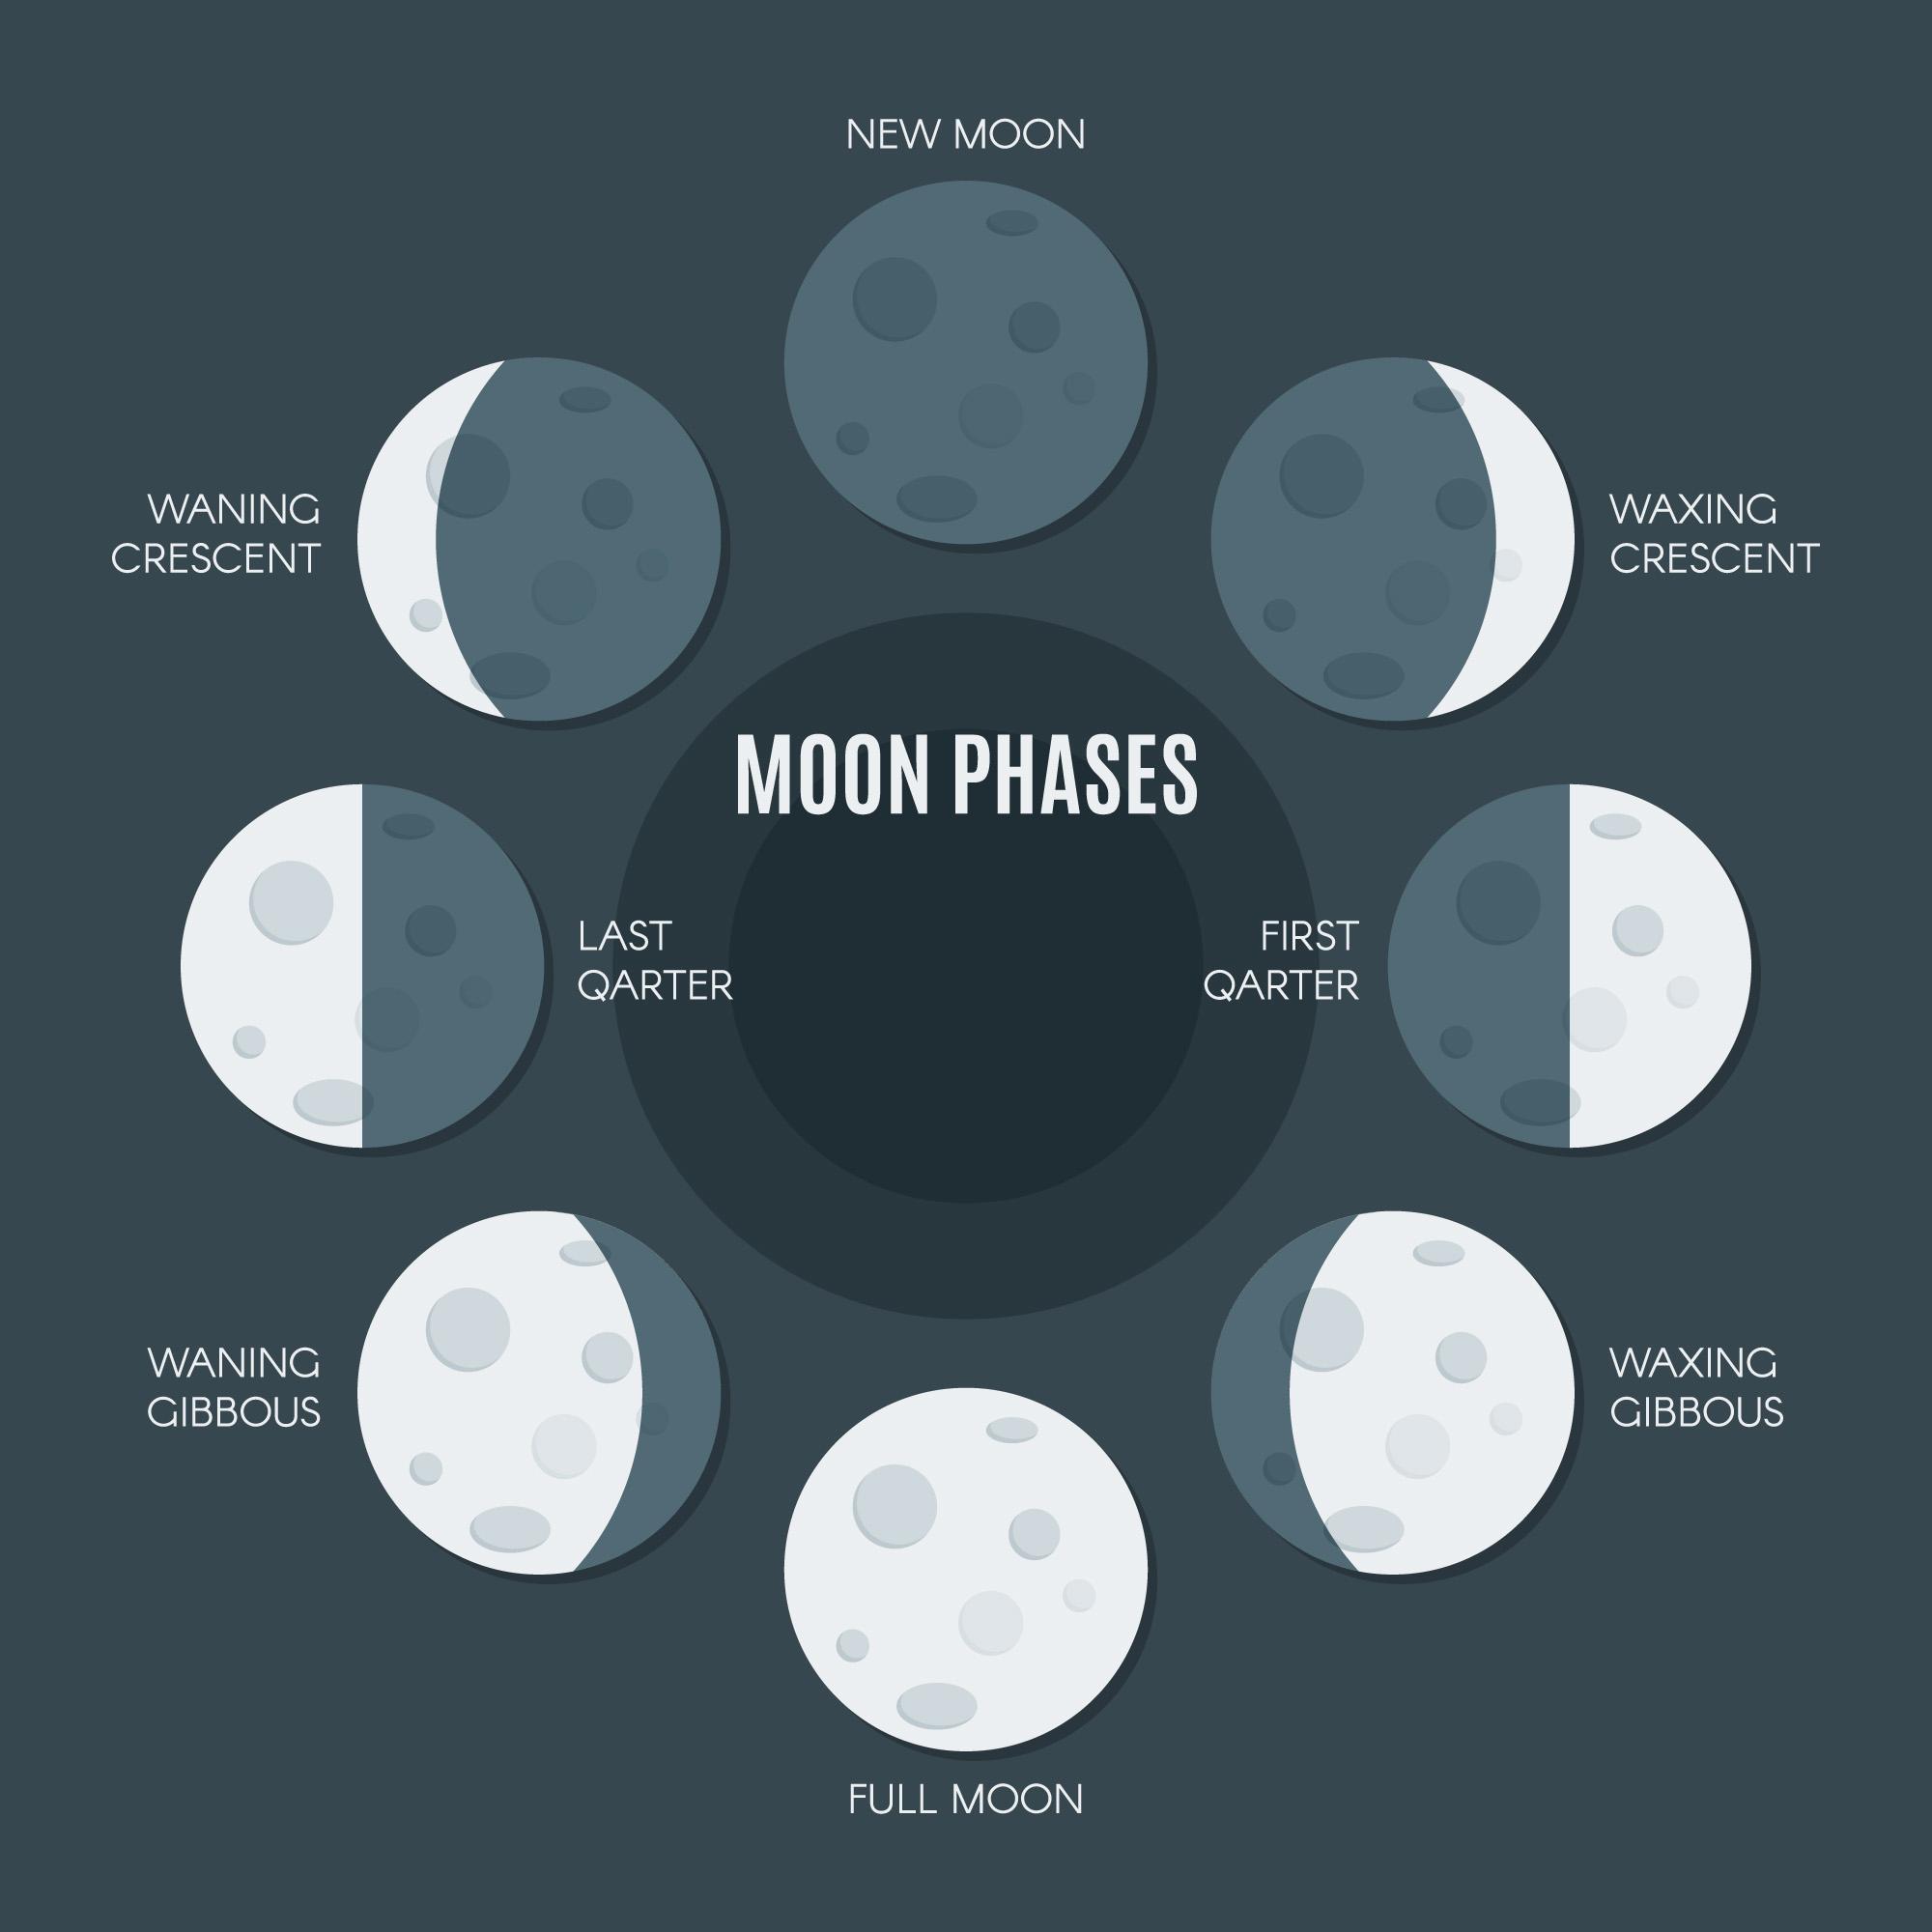 Complete infographic of the Phases of the Moon - New Moon, Waxing Crescent, First Quarter, Waxing Gibbous, Full Moon, Waning Gibbous, Last Quarter, and Waning Crescent